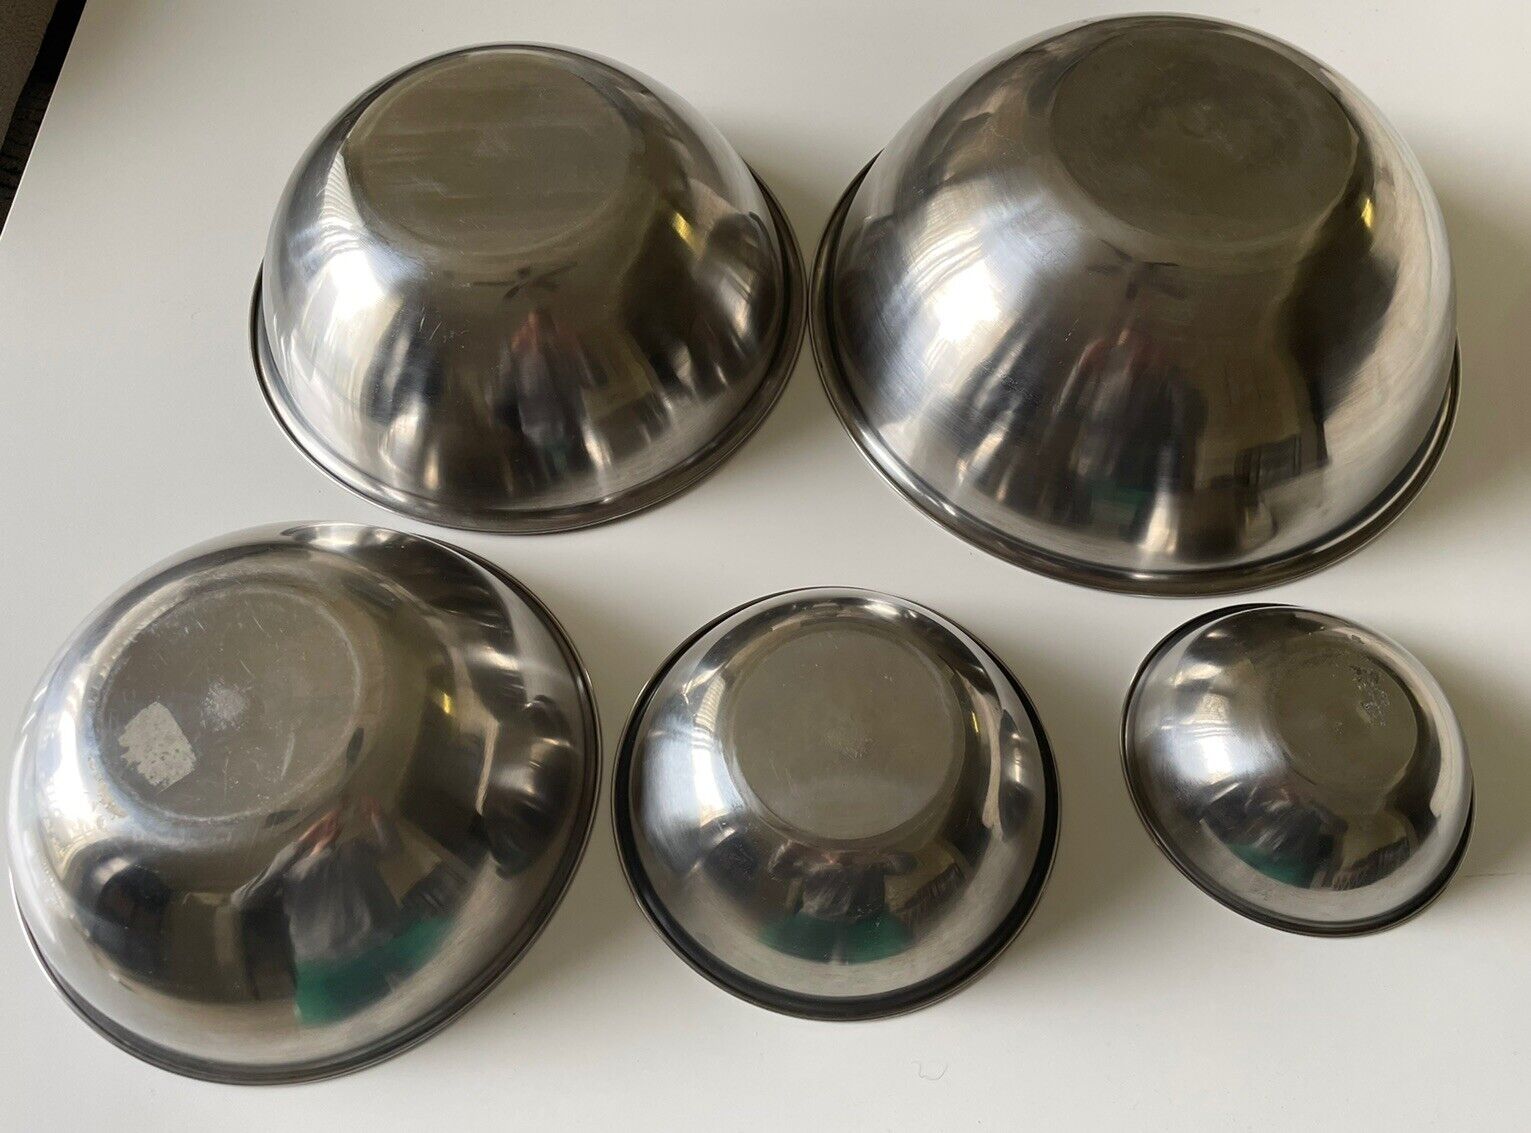 Vintage Cooktime Cookware by Ken Carter Stainless Steel Mixing Bowl Set Of 5